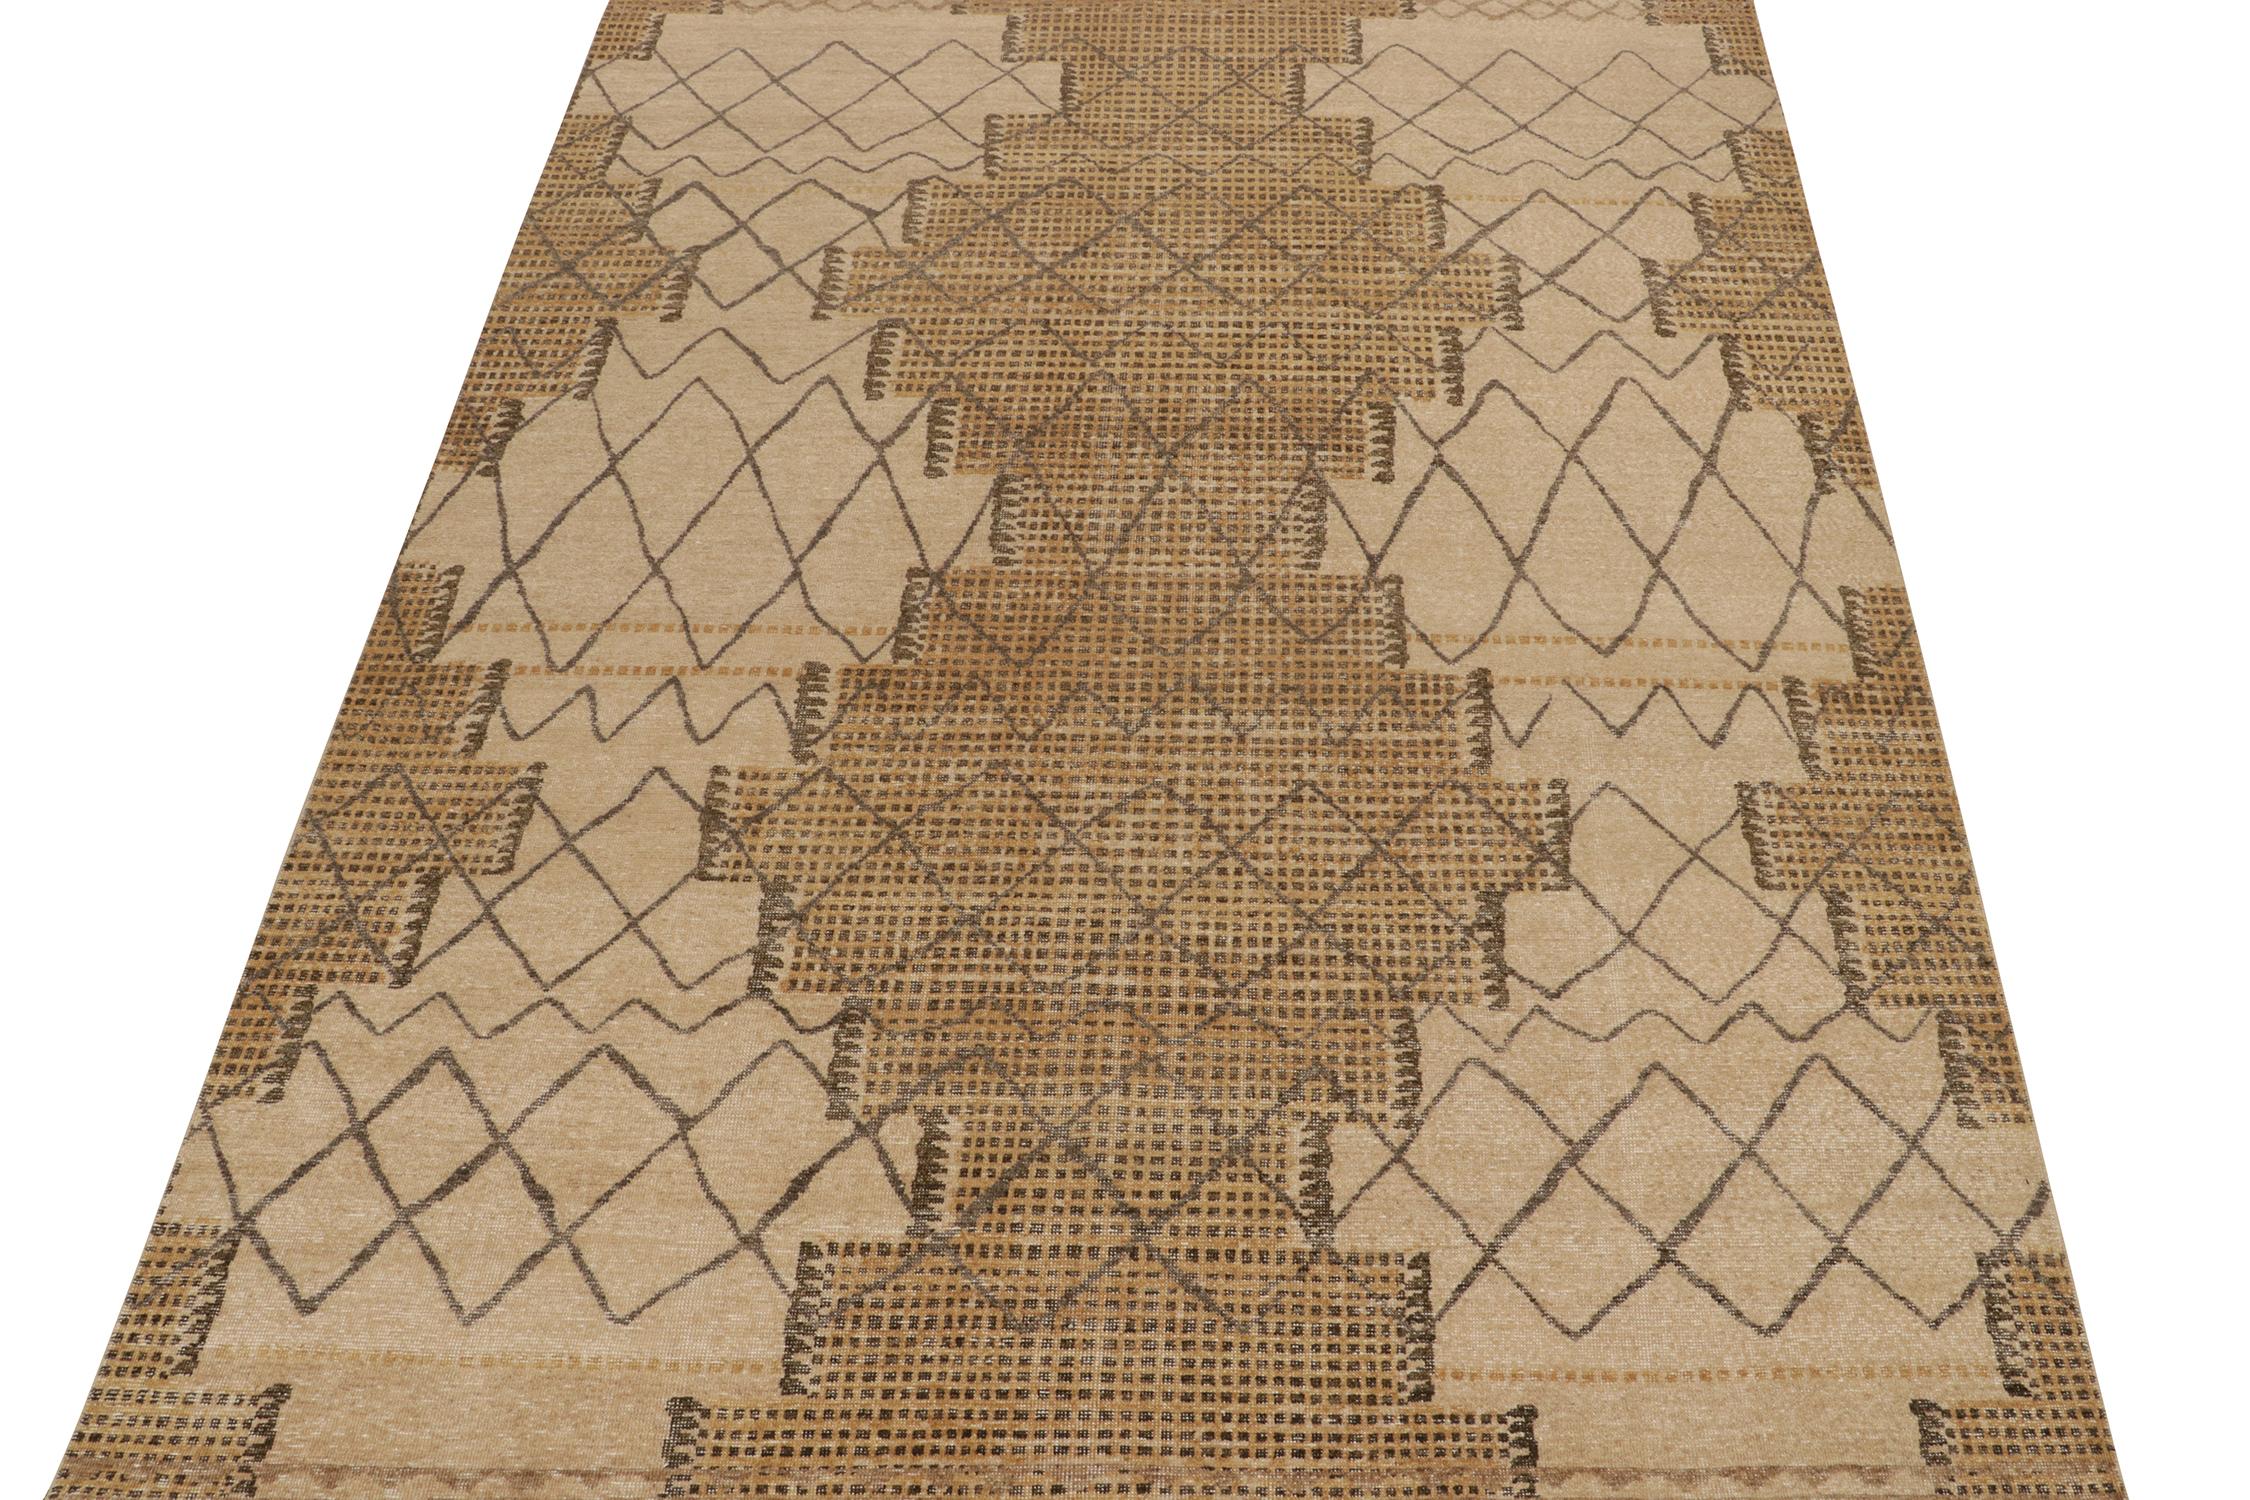 Tribal Rug & Kilim’s Distressed Moroccan Style Rug in Beige, Brown and Gray Patterns For Sale